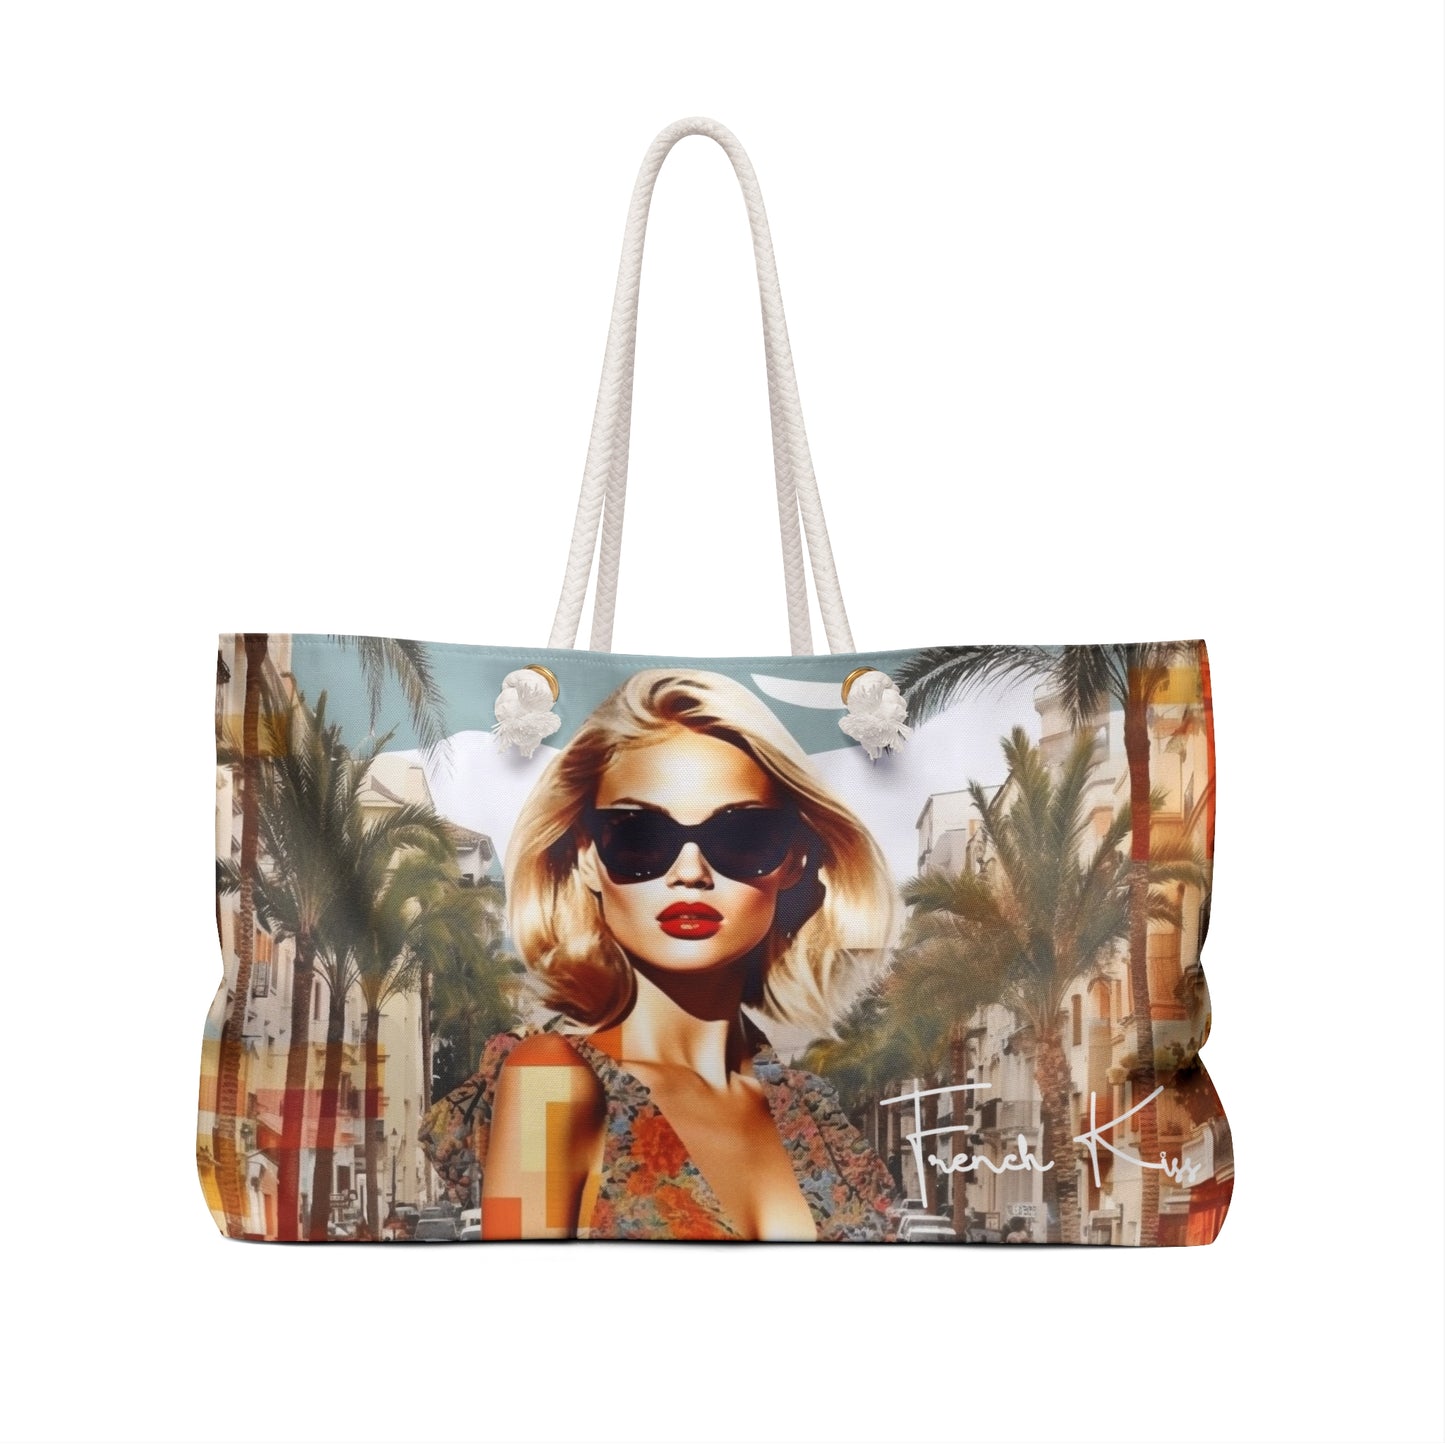 J'ADORE Sassy Sexy Chic Weekender Accessory Bag French Kiss Pop Art, Classy, Couture, Travel, Fashion, Beauty gift item